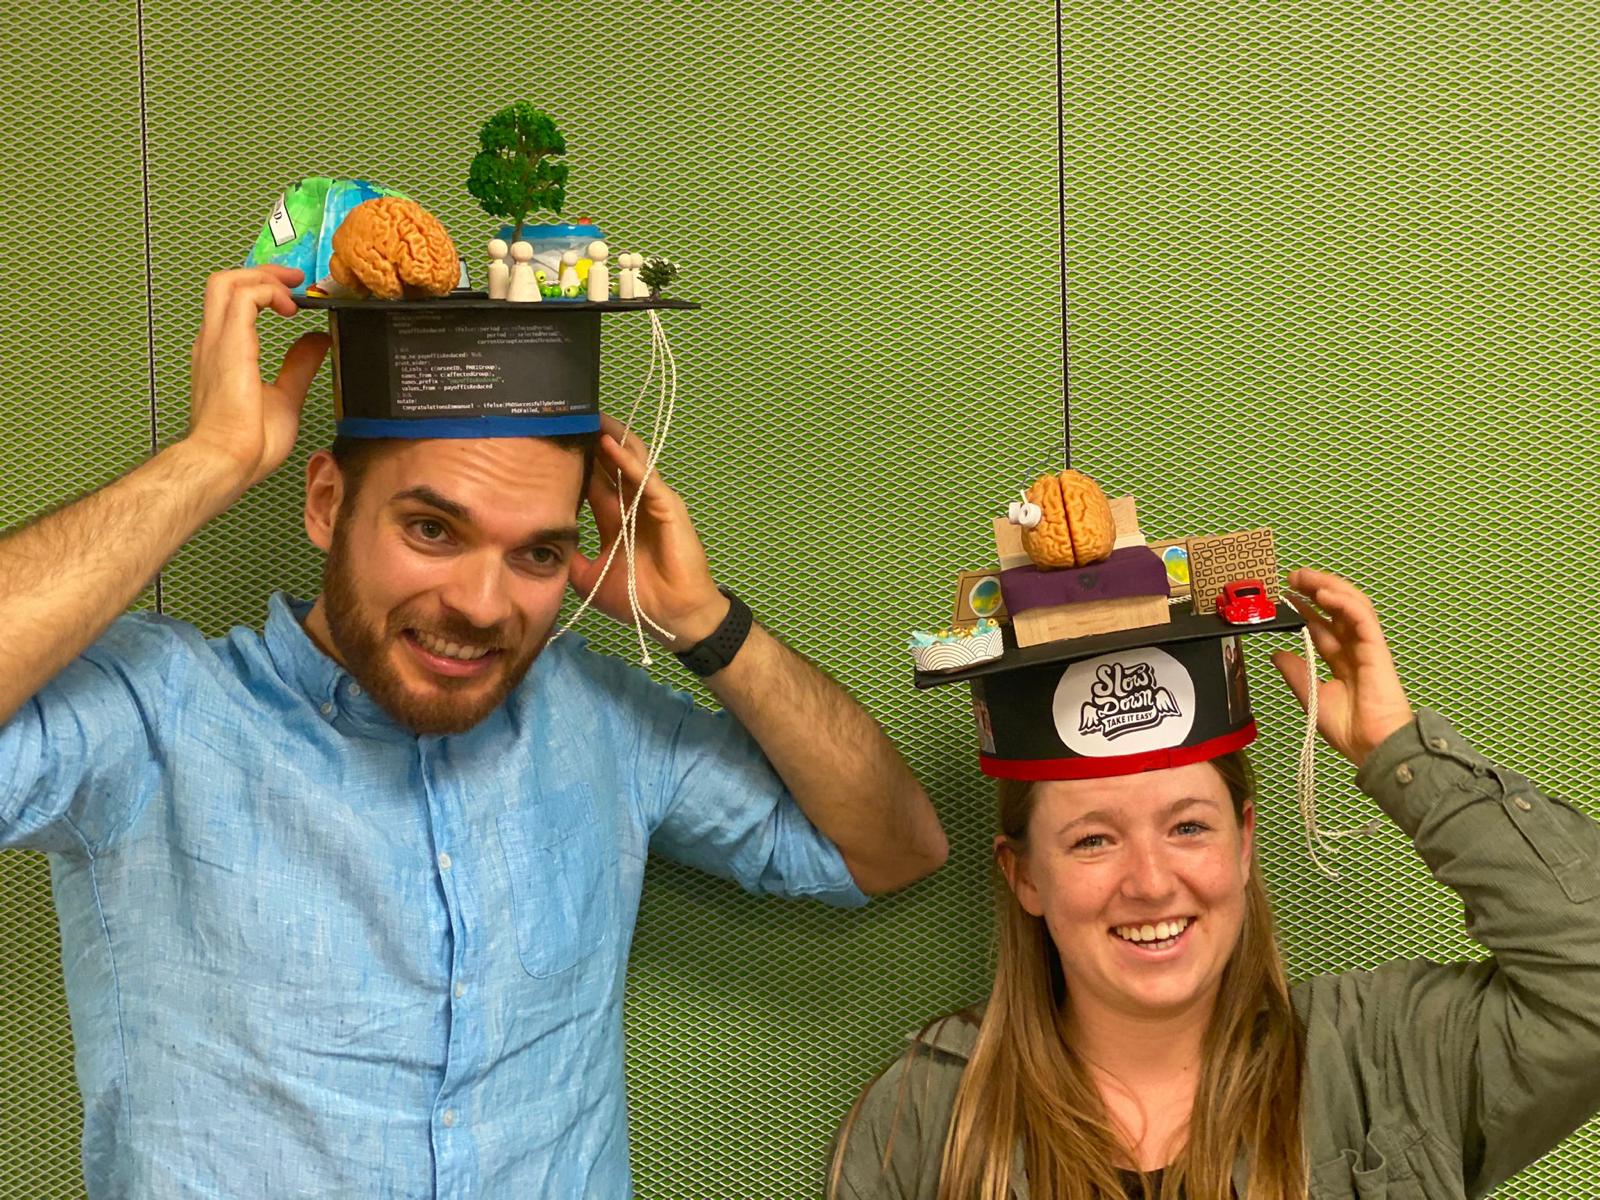 Emmanuel and Mirjam wear their doctoral hats, which represent the contents of their dissertations, e.g. a bed and brain on Mirjam's hat and a brain and globe on Emmanuel's hat.